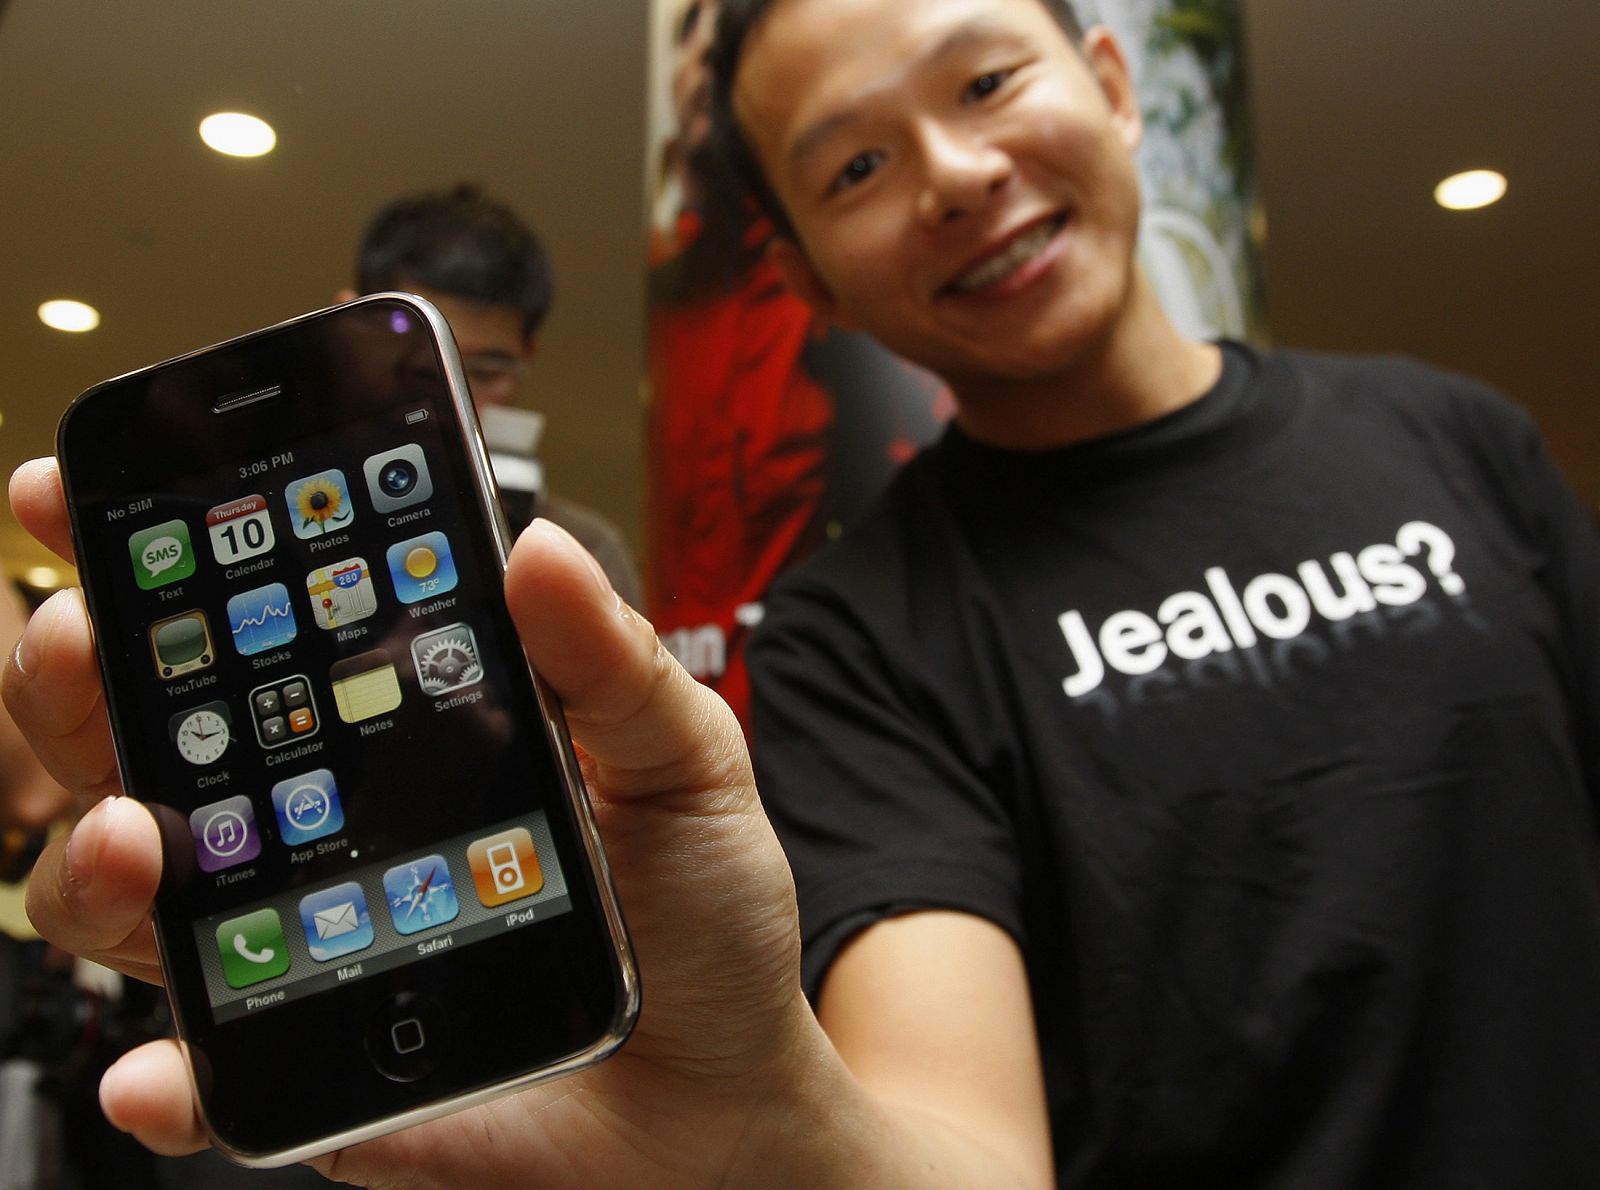 File photo of a man holding an Iphone in Hongkong